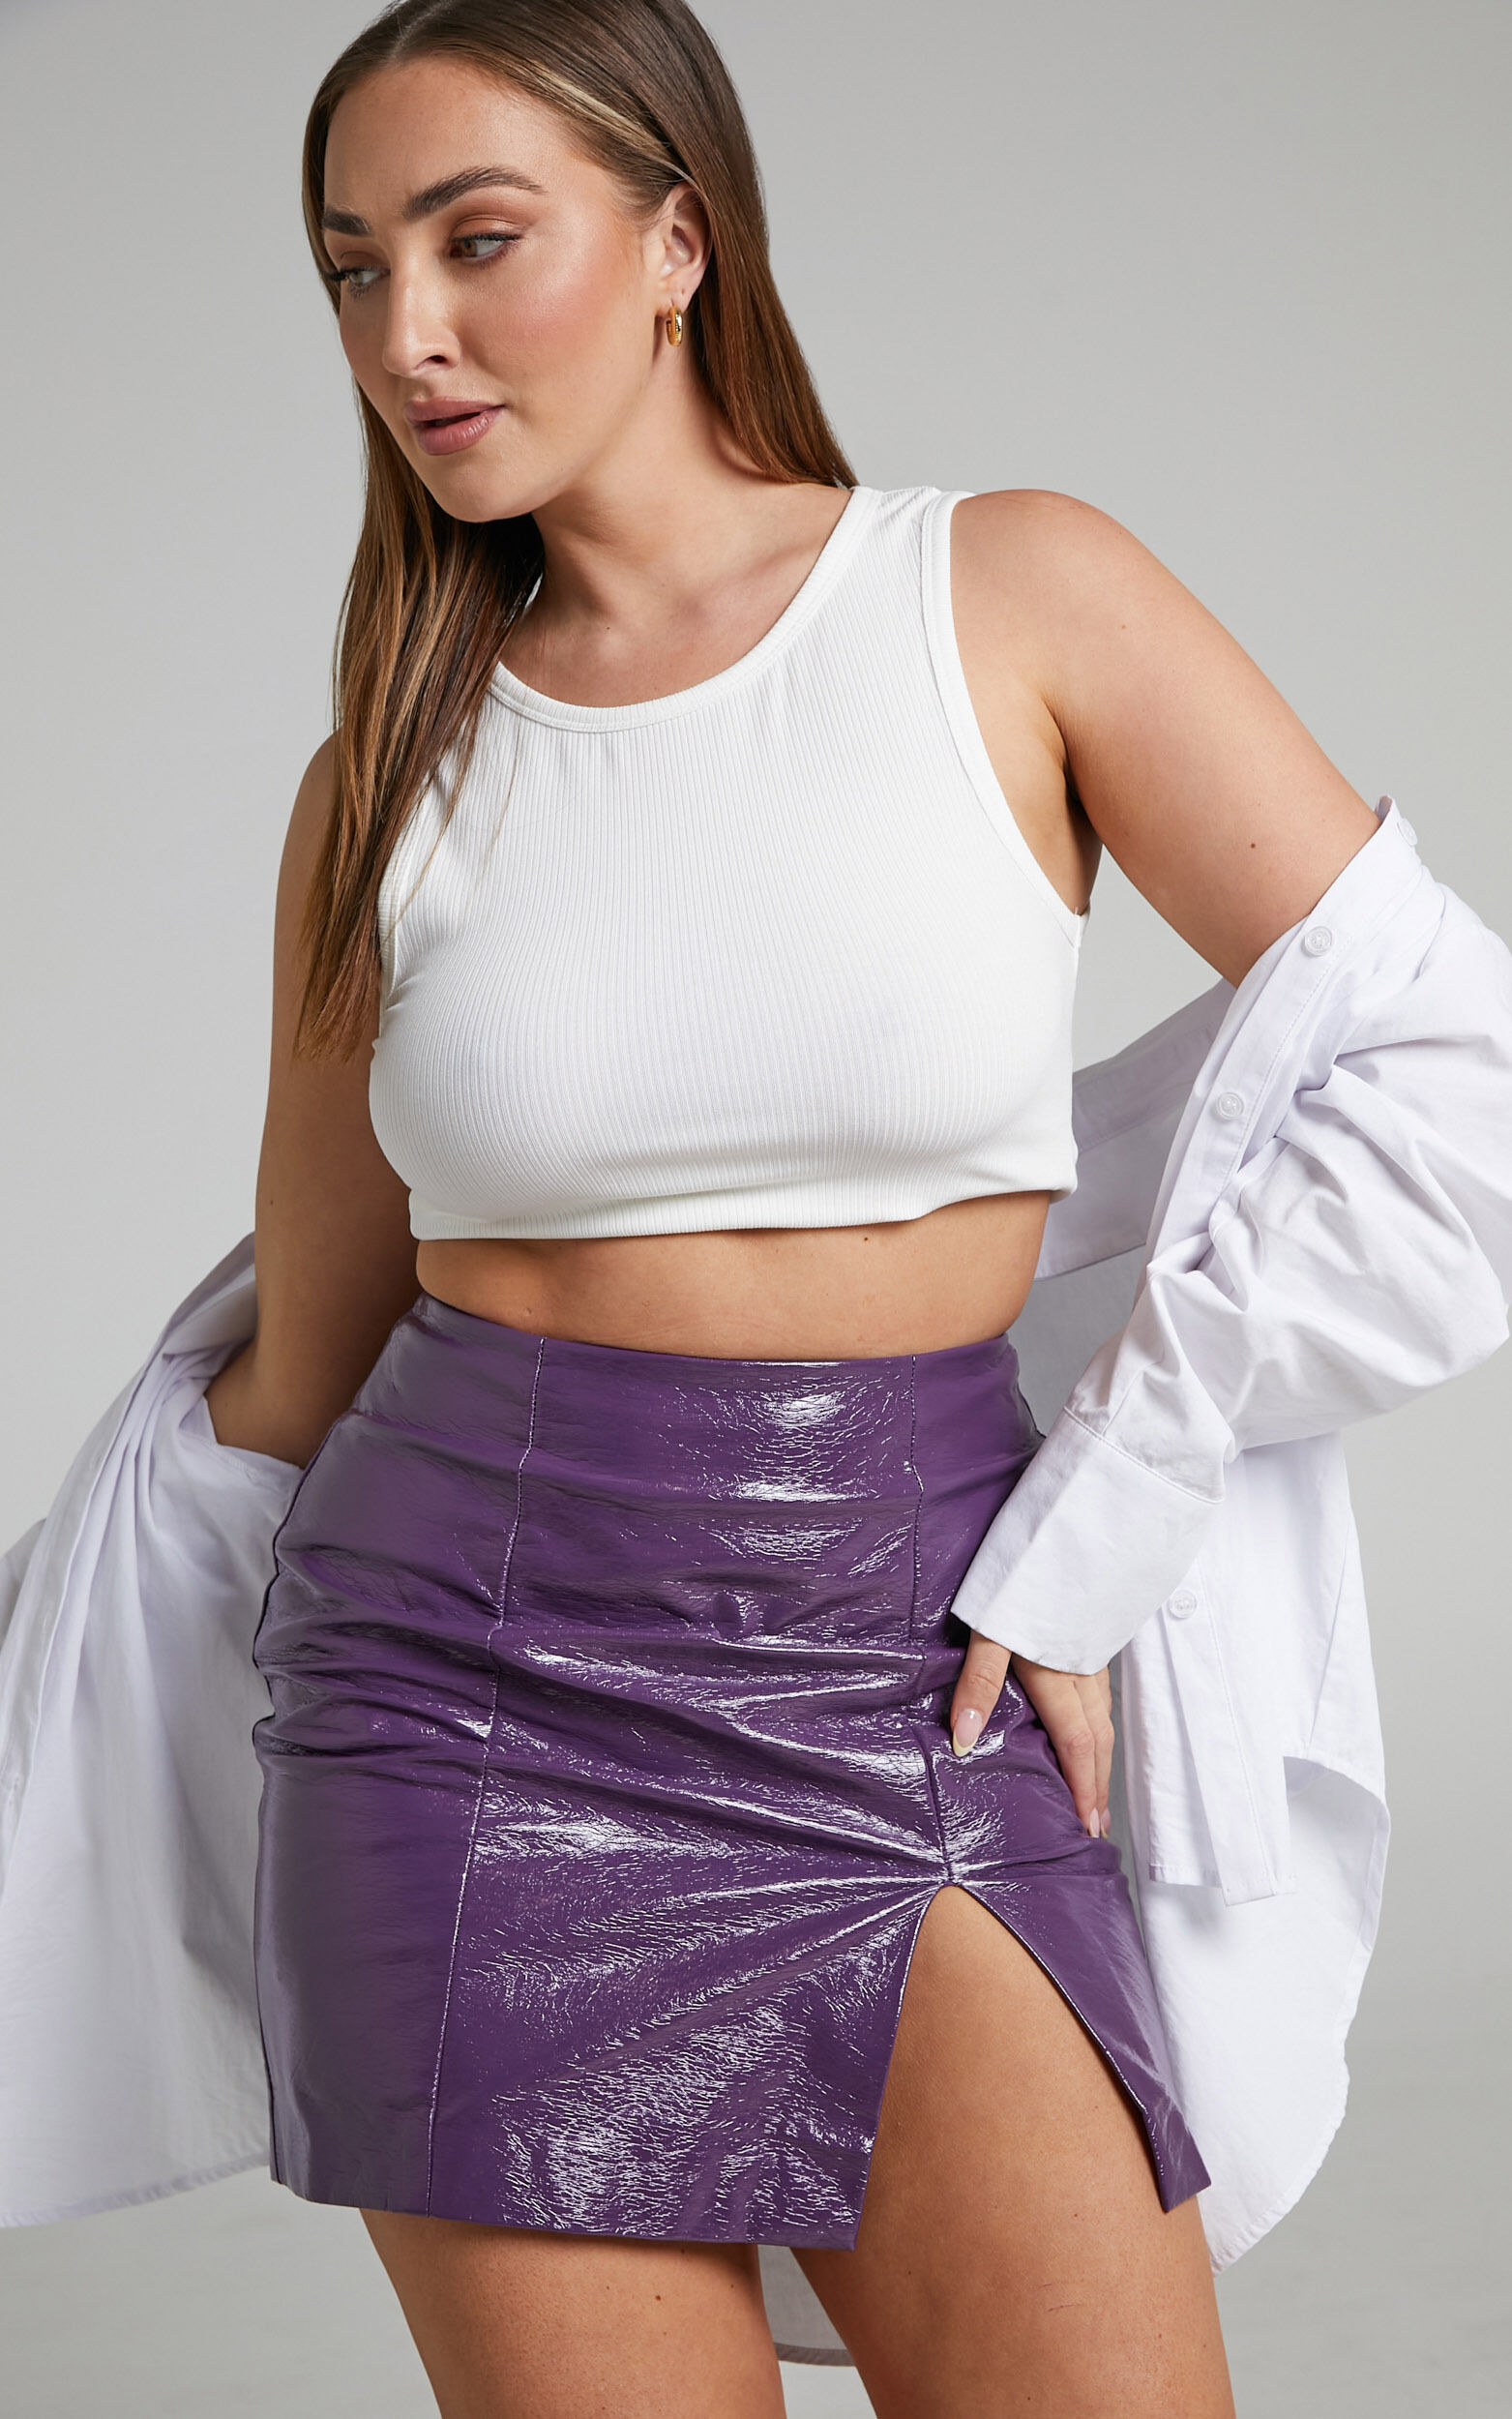 Reiko Patent Faux Leather Mini Skirt in Purple - 06, PRP1, super-hi-res image number null